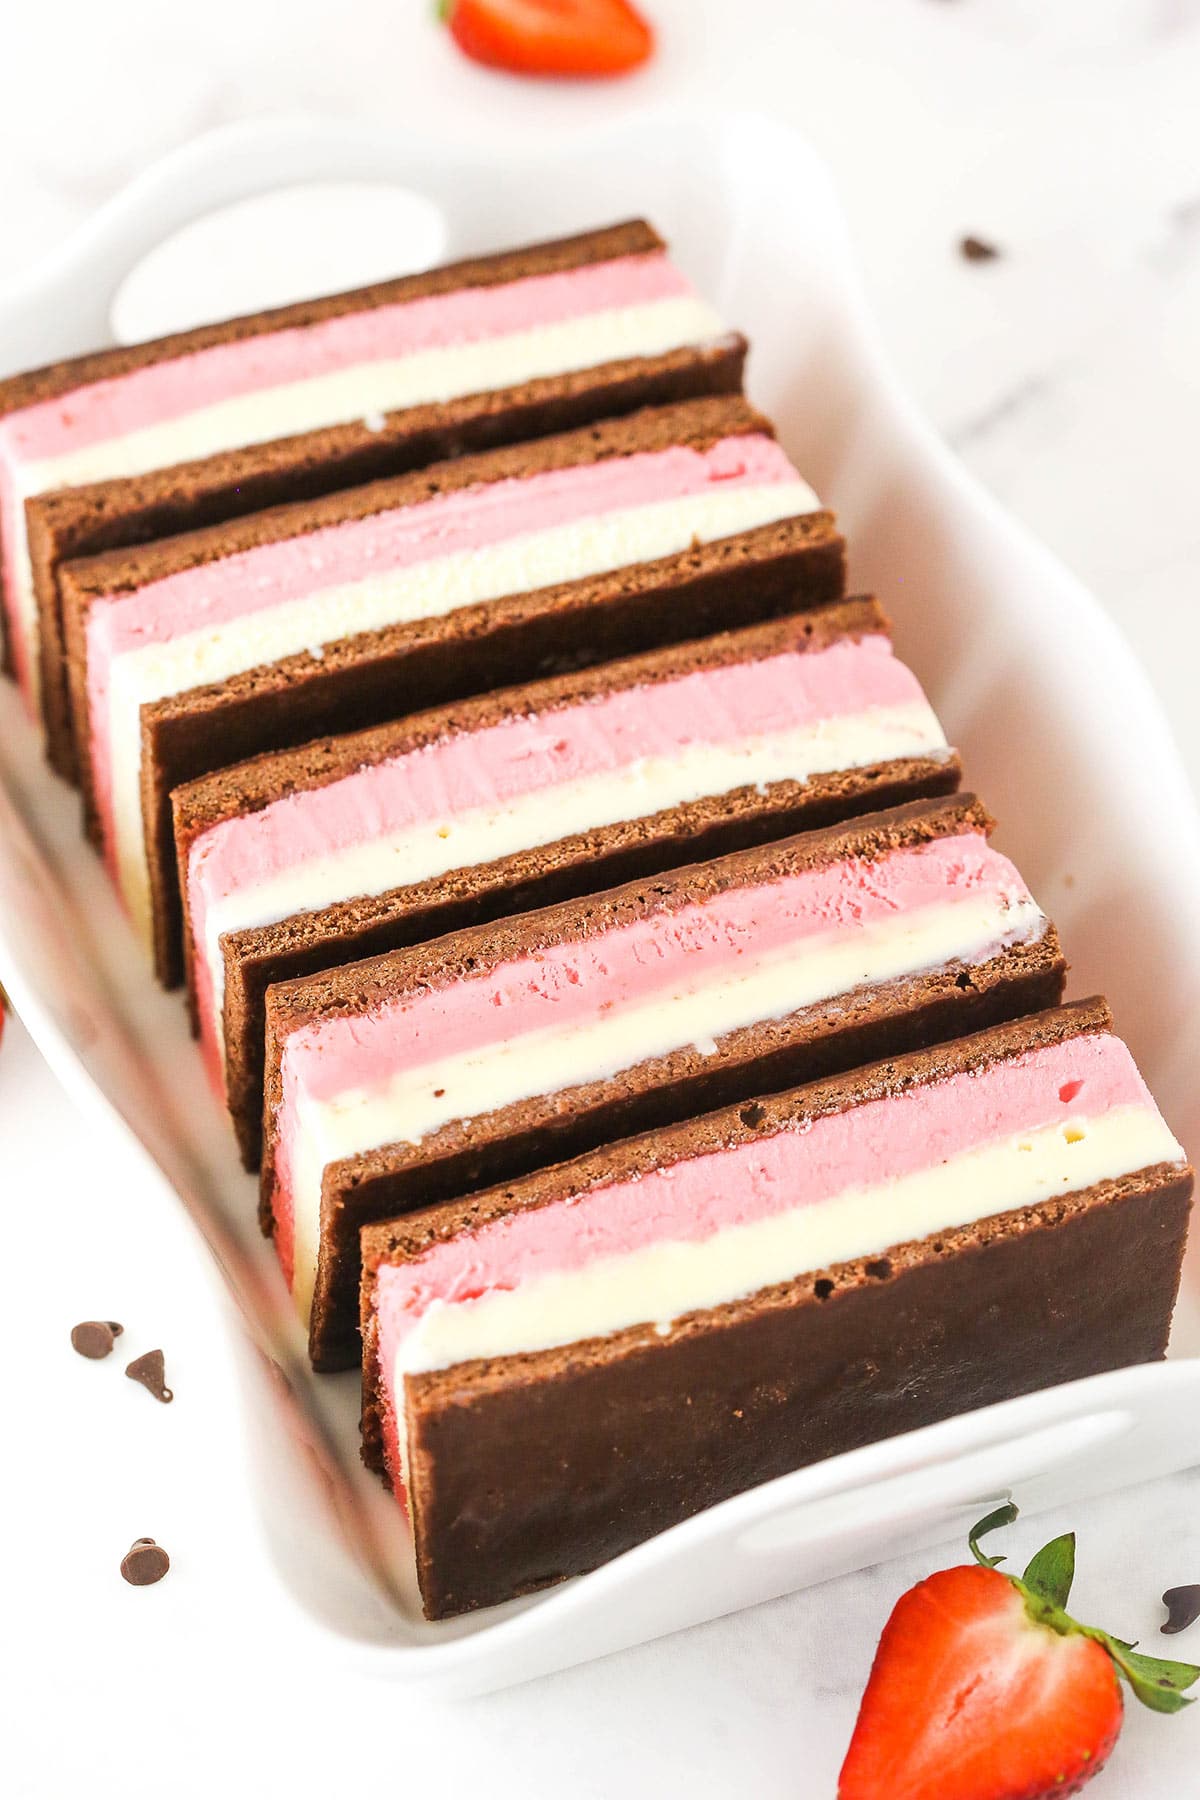 Five Neapolitan ice cream sandwiches lined up in a baking dish with handles